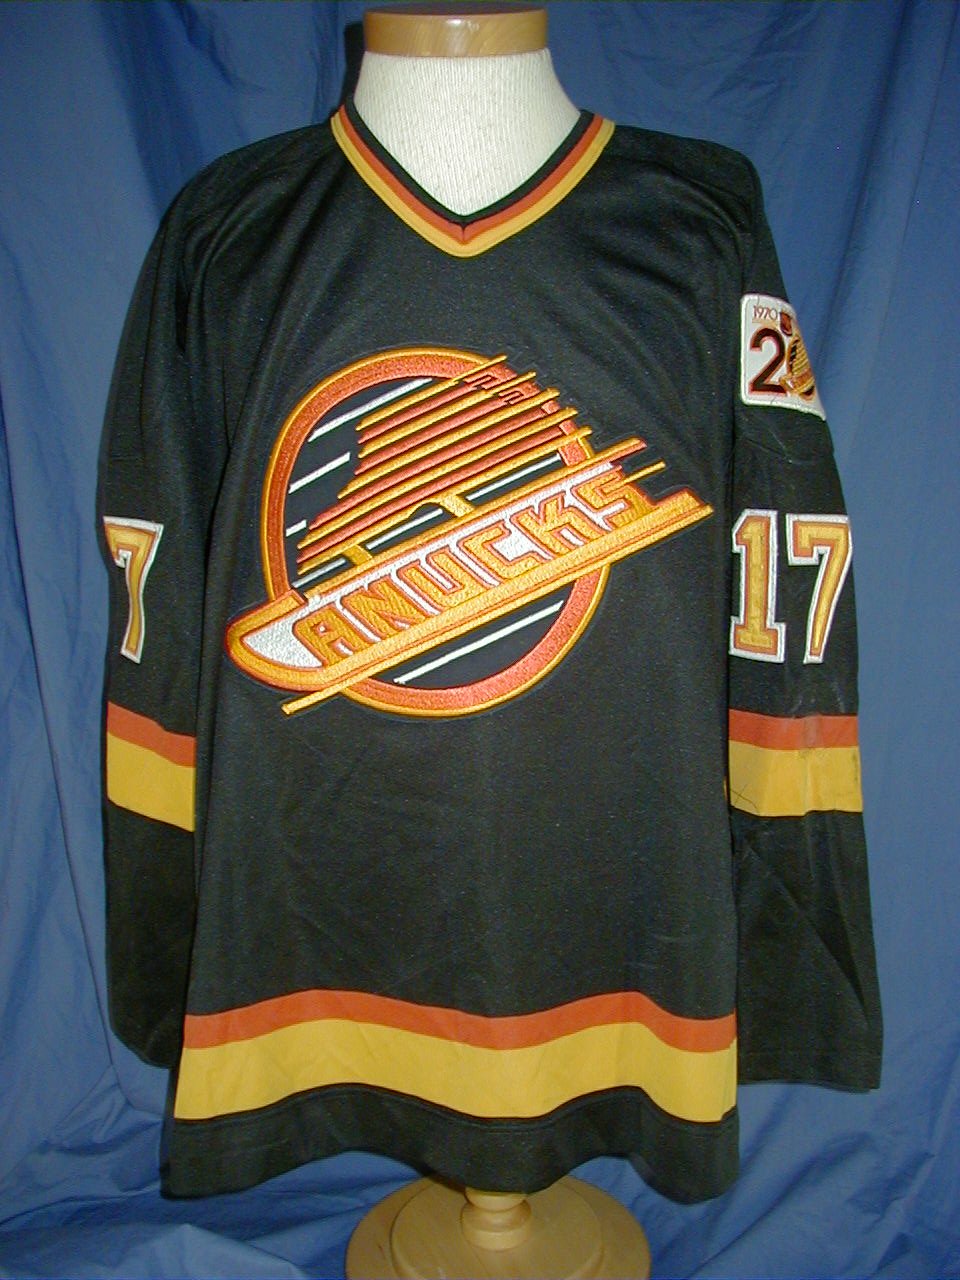 OFFICIAL VANCOUVER CANUCKS GAME WORN JERSEY FORUM